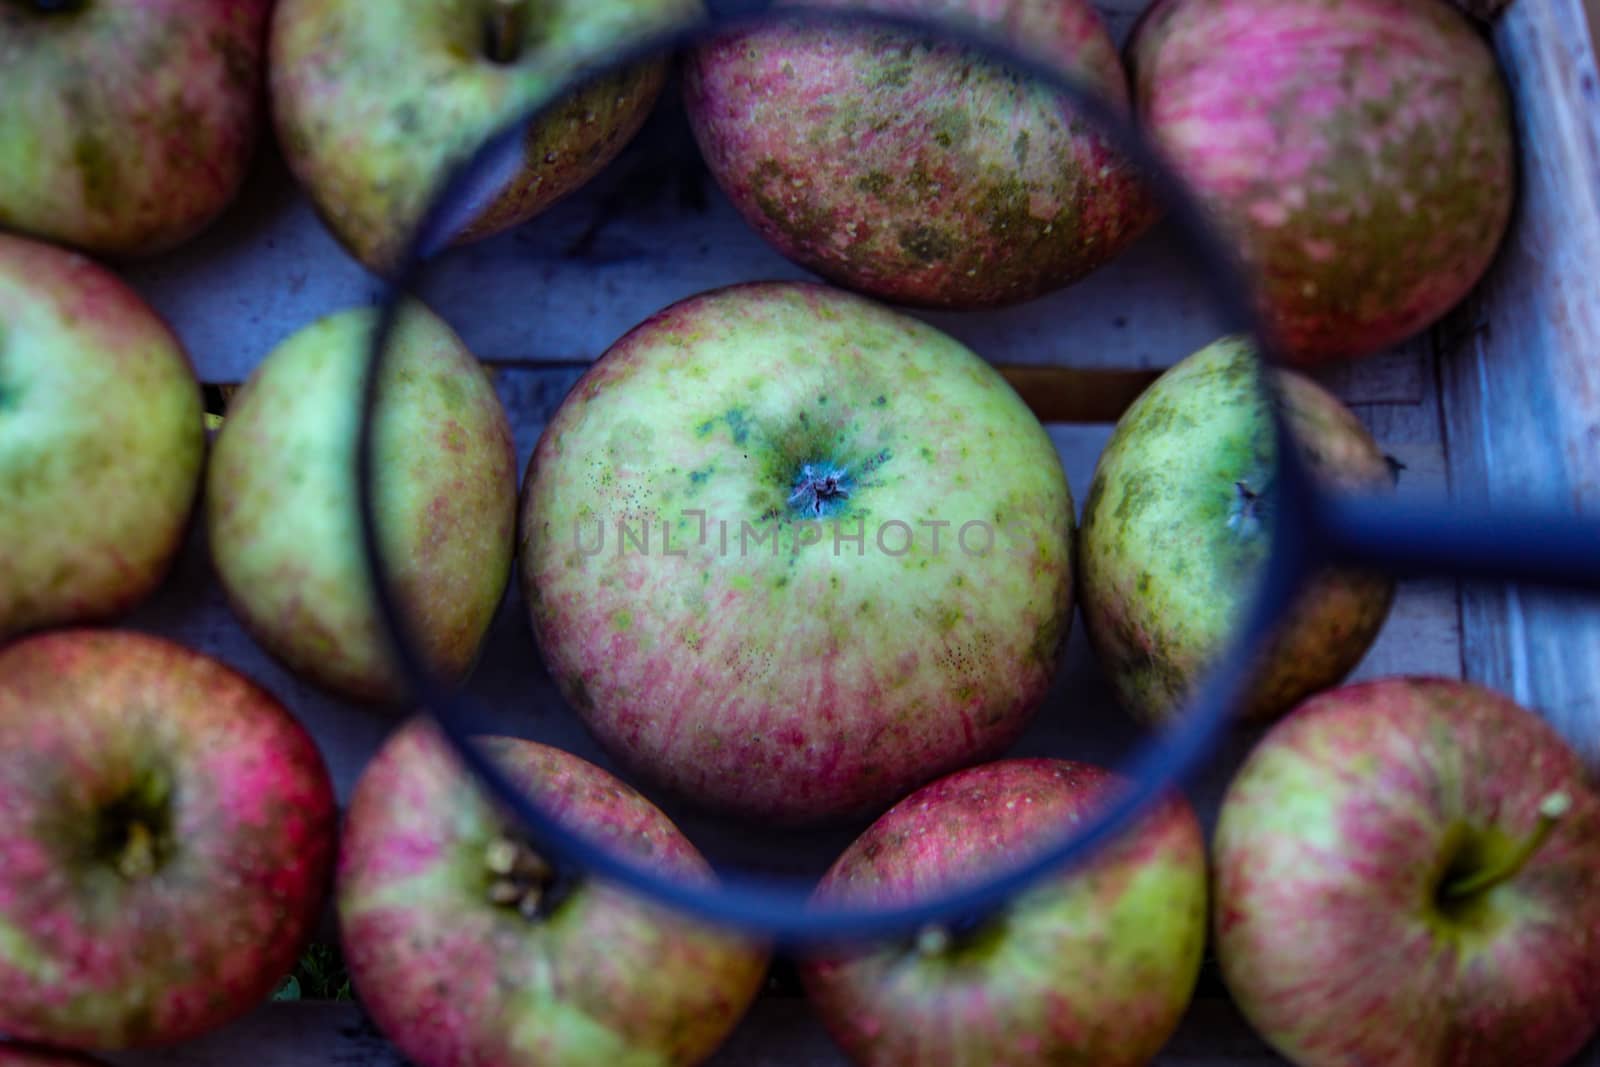 One apple enlarged compared to the others in the crate where the other apples are stacked. An apple magnified with a magnifying glass inside a wooden crate. Zavidovici, Bosnia and Herzegovina.